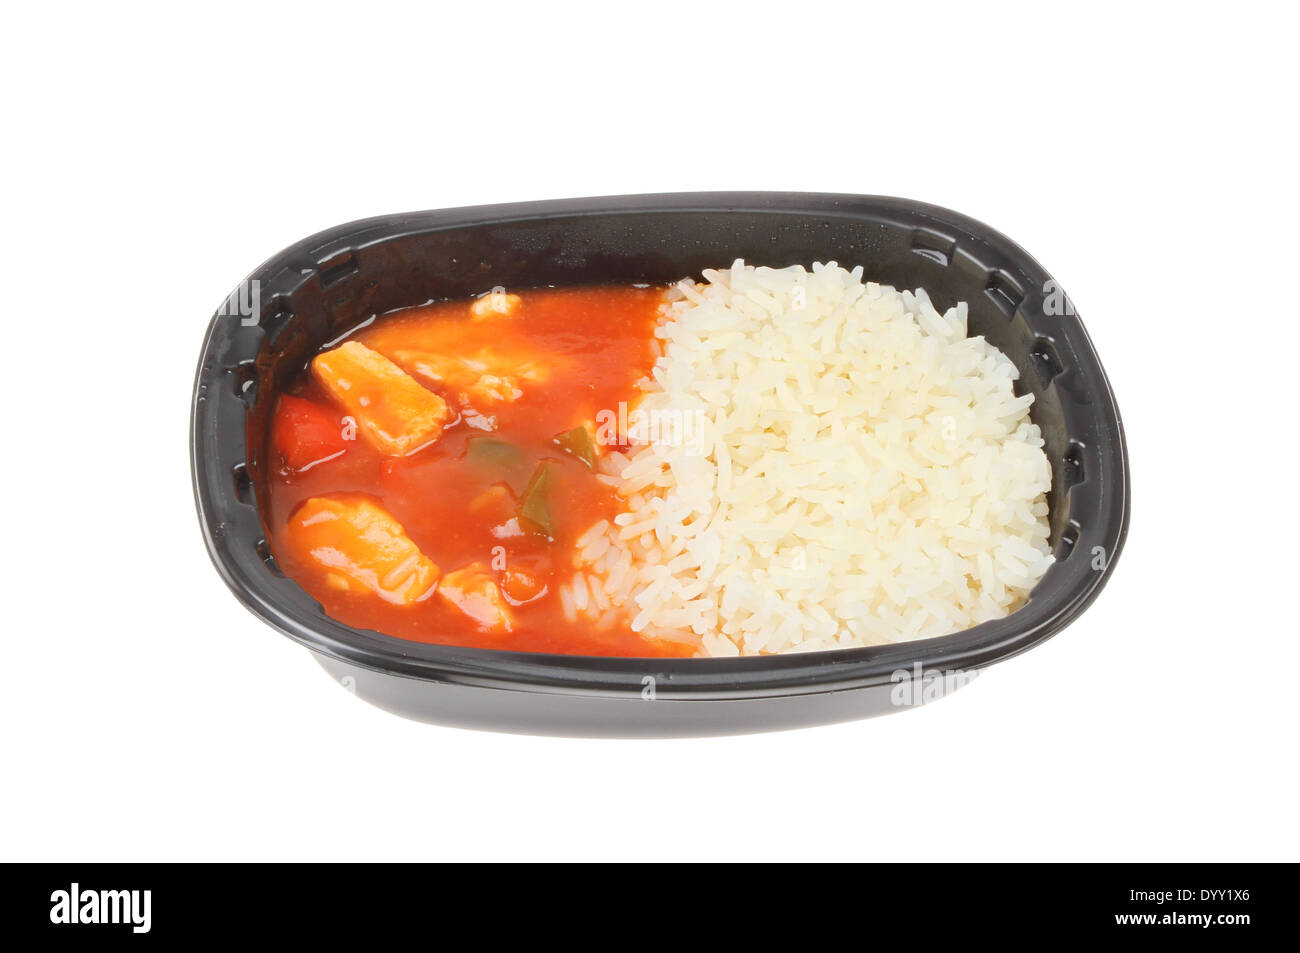 Convenience food, Chinese sweet and sour chicken and rice in a plastic carton isolated against white Stock Photo